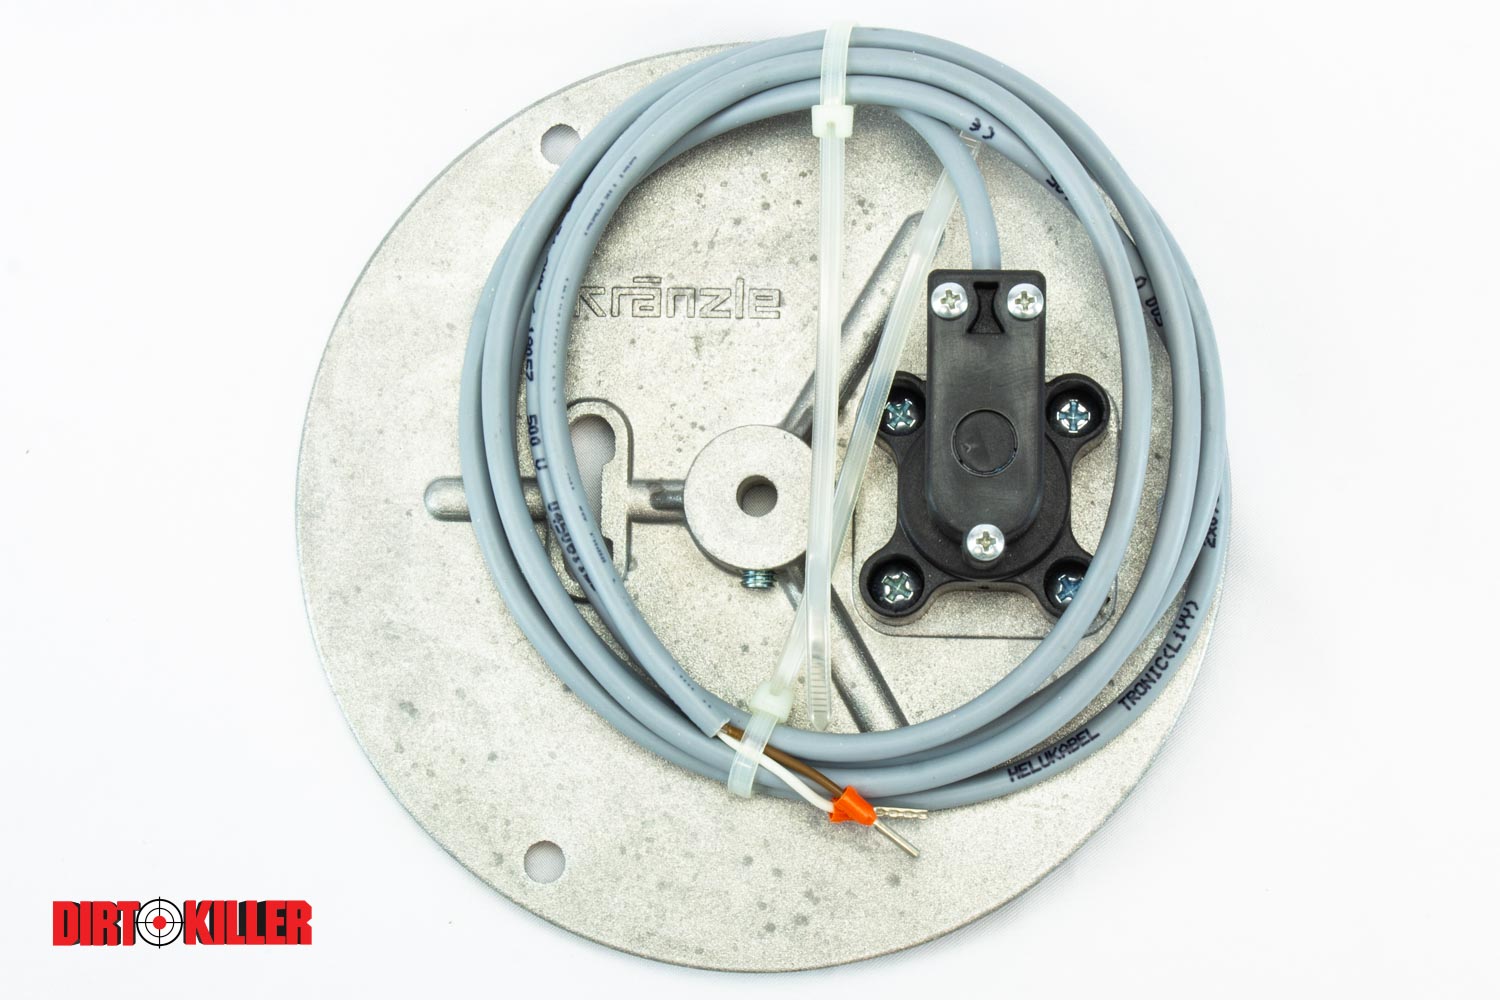 Kränzle 3 Piece Electronic Thermostat Assembly for Therm 5 Series-image_2